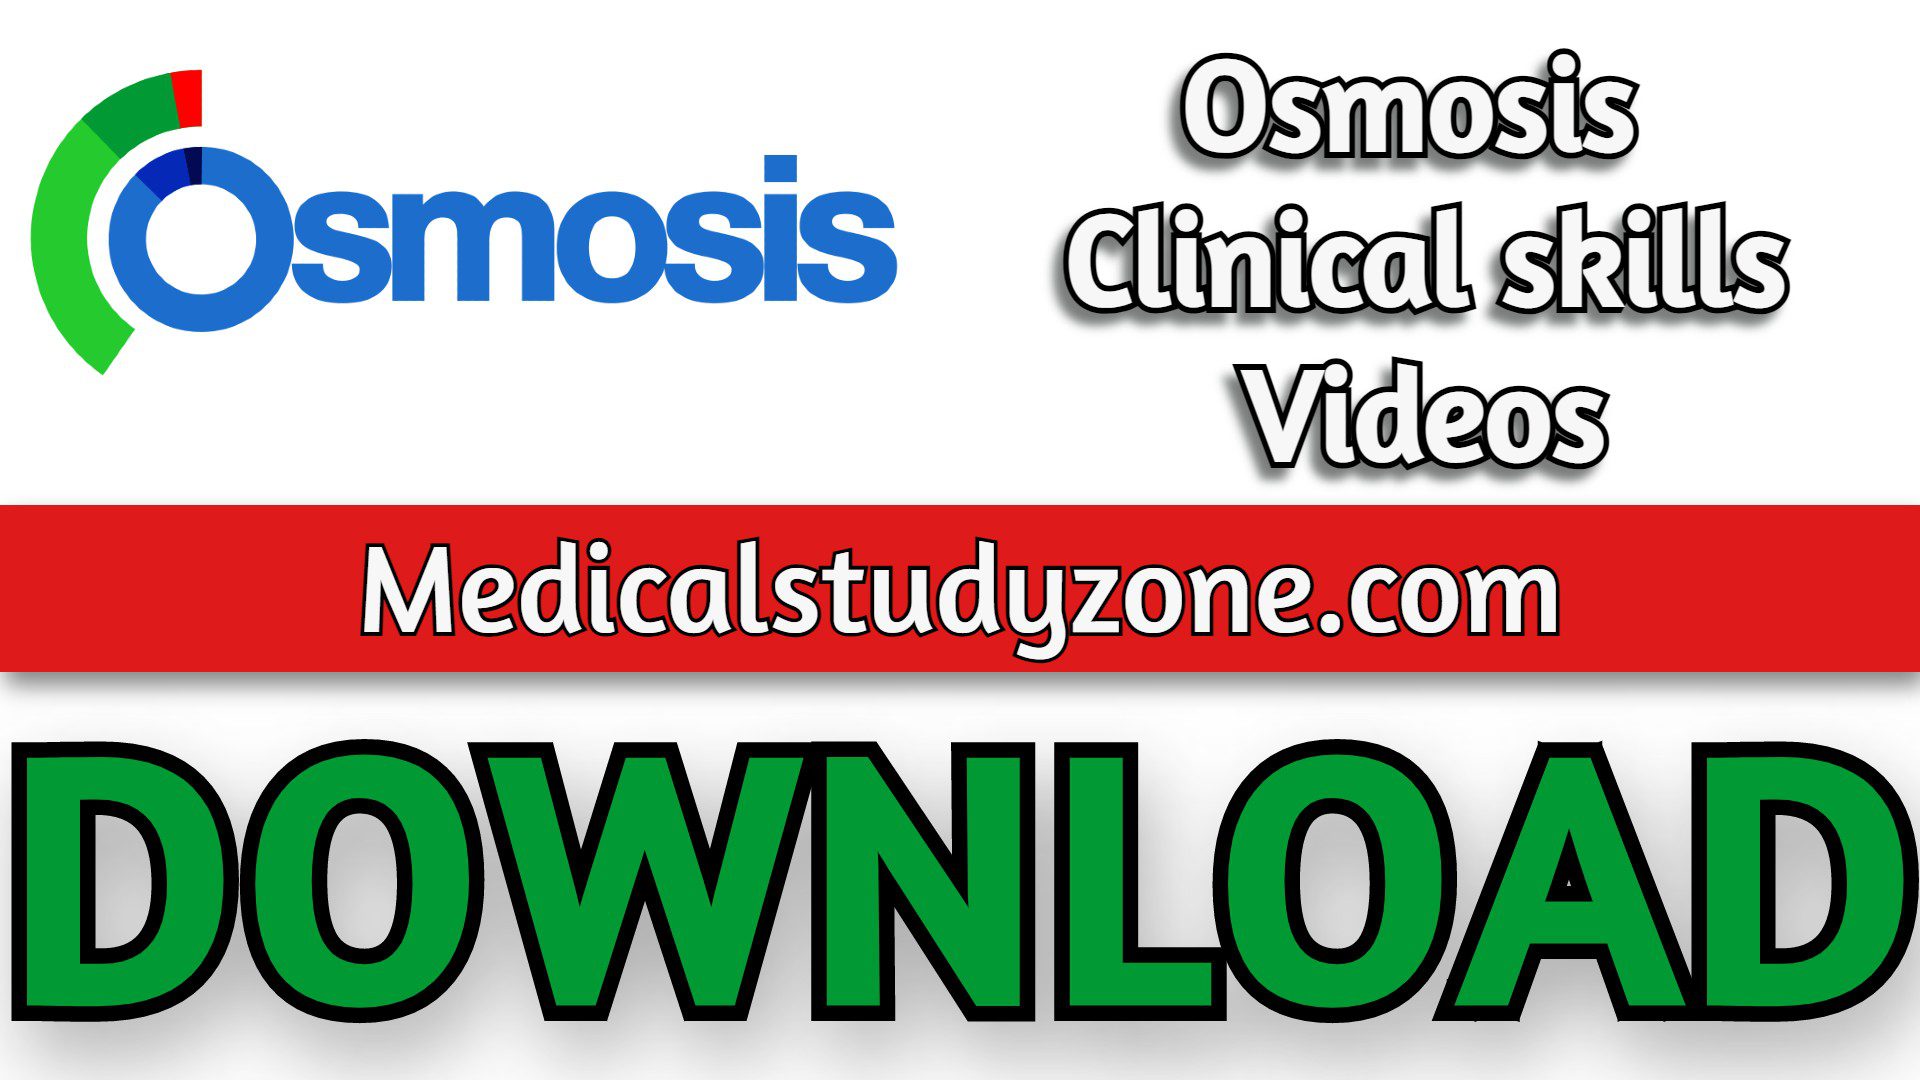 Osmosis Clinical skills Videos 2023 Free Download